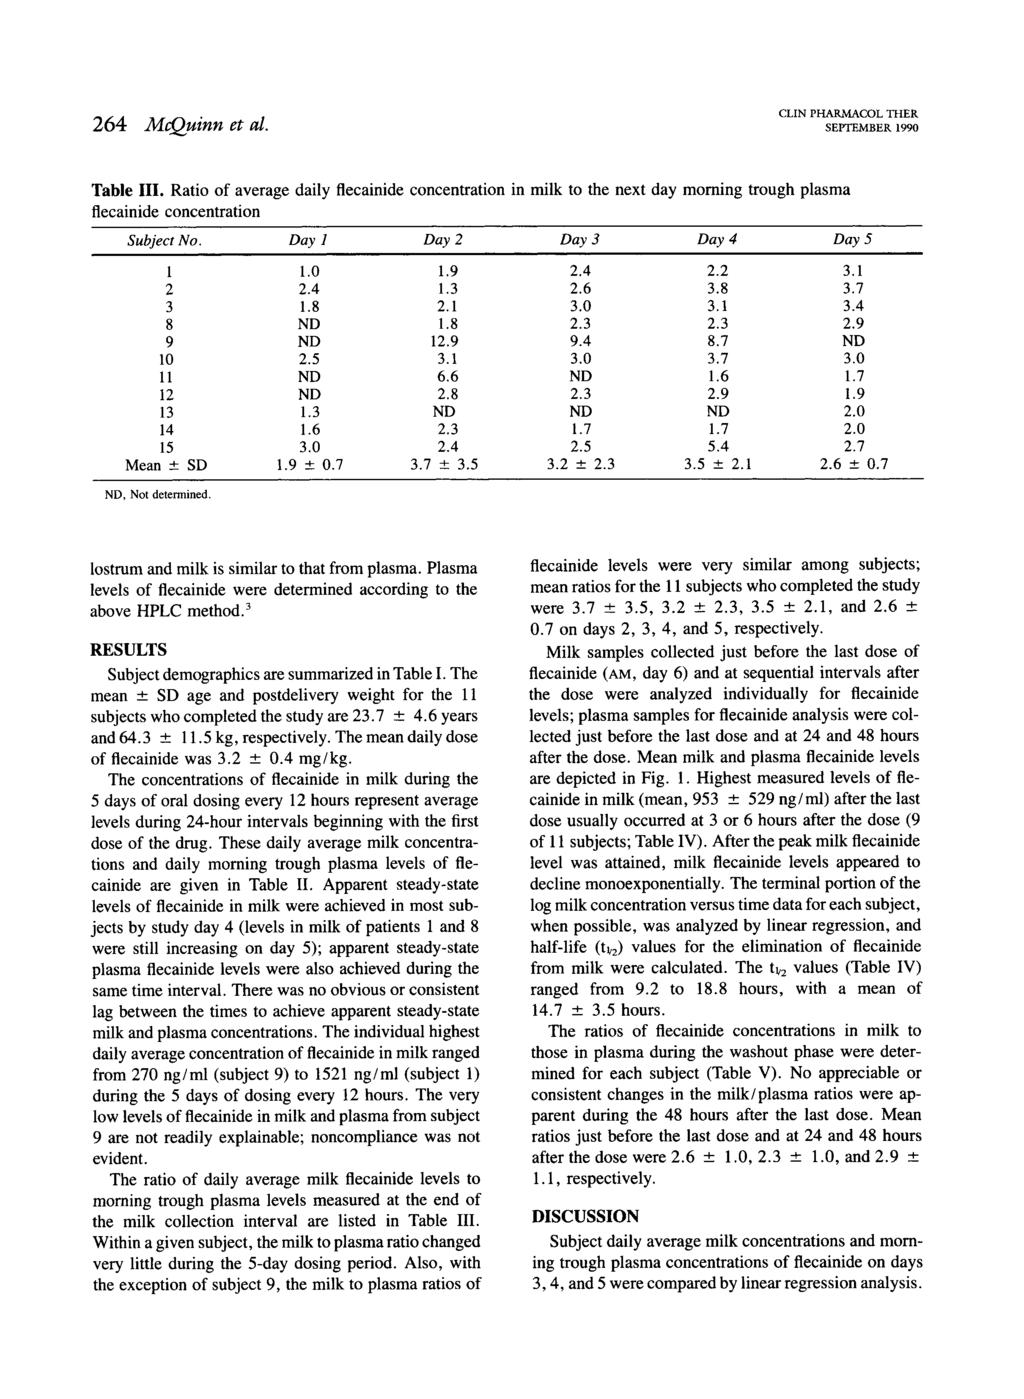 264 McQuinn et al. CLIN PHARMACOL THER SEPTEMBER 1990 Table III. Ratio of average daily flecainide concentration in milk to the next day morning trough plasma flecainide concentration Subject No.